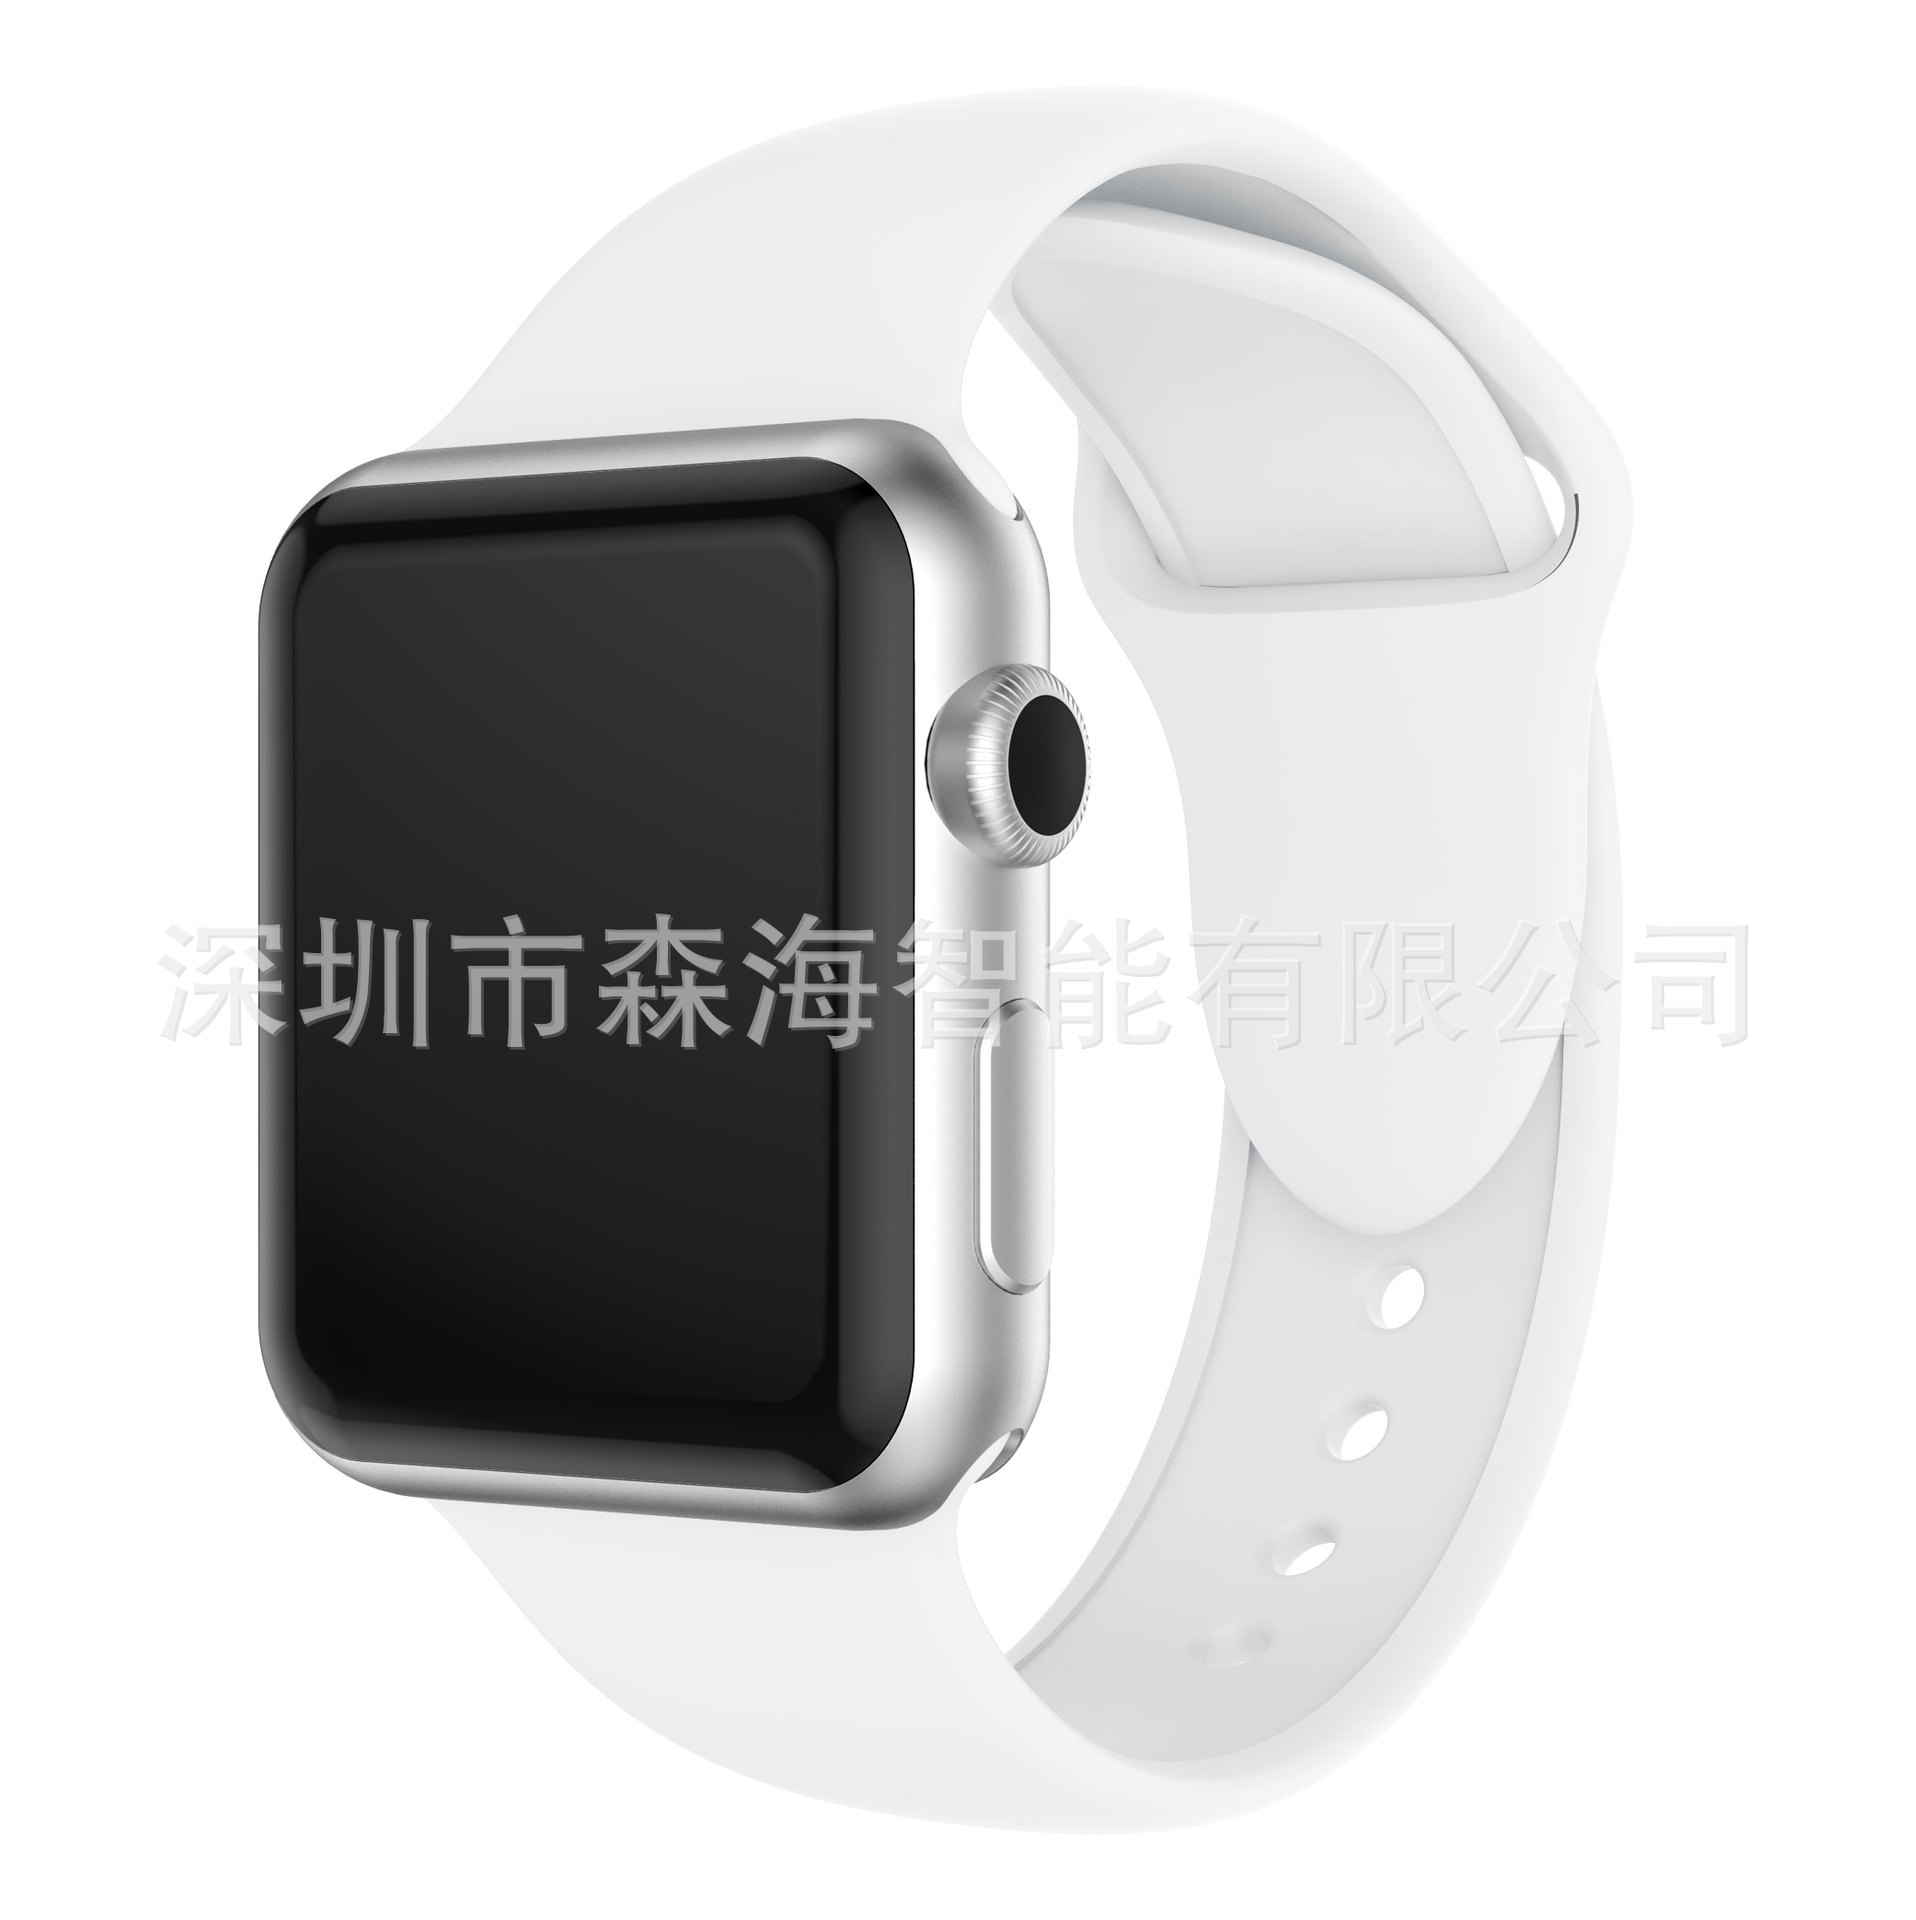 Suitable for apple watch1-7 generation w...